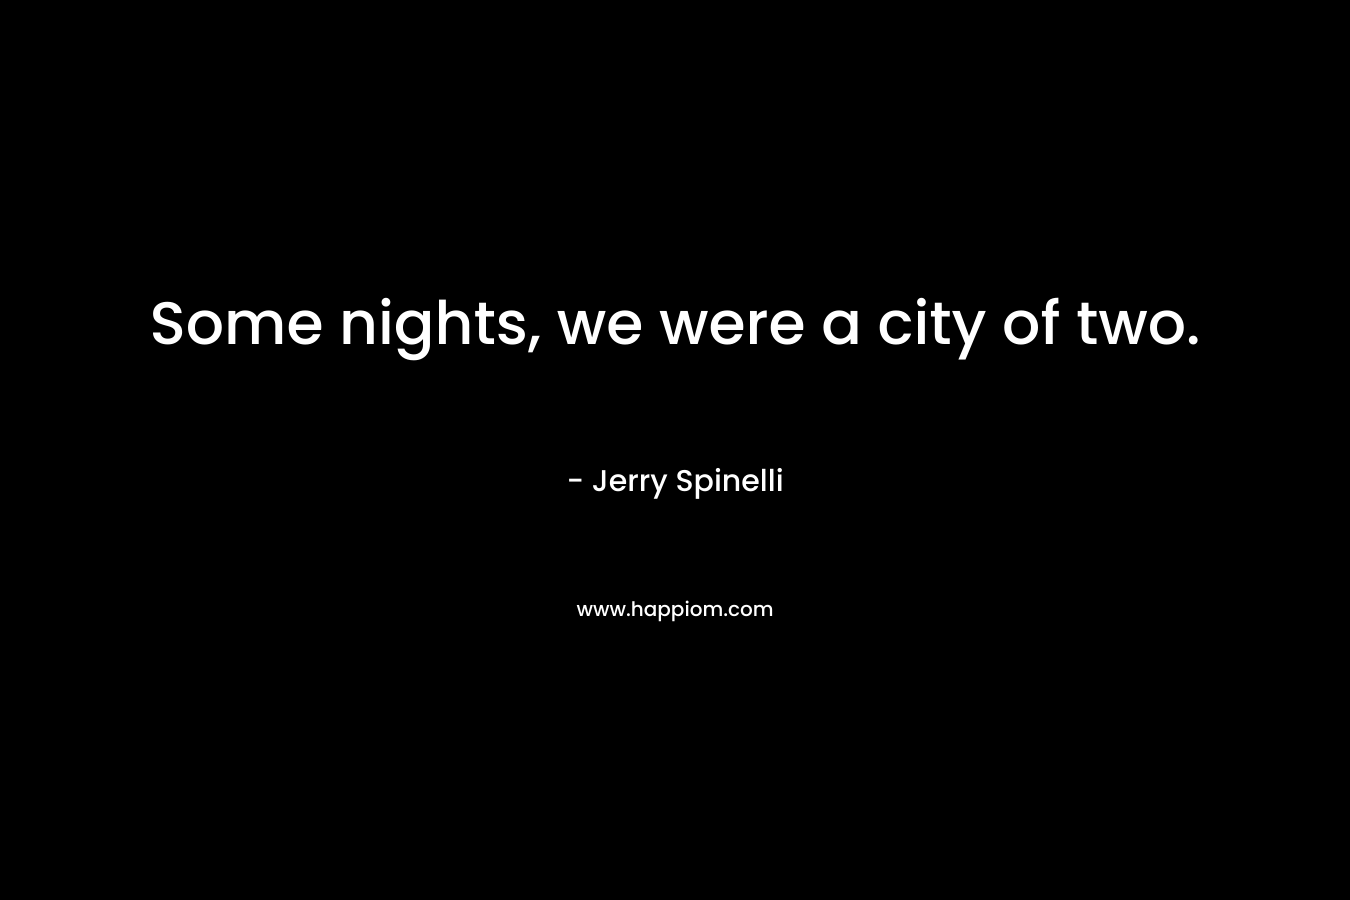 Some nights, we were a city of two. – Jerry Spinelli